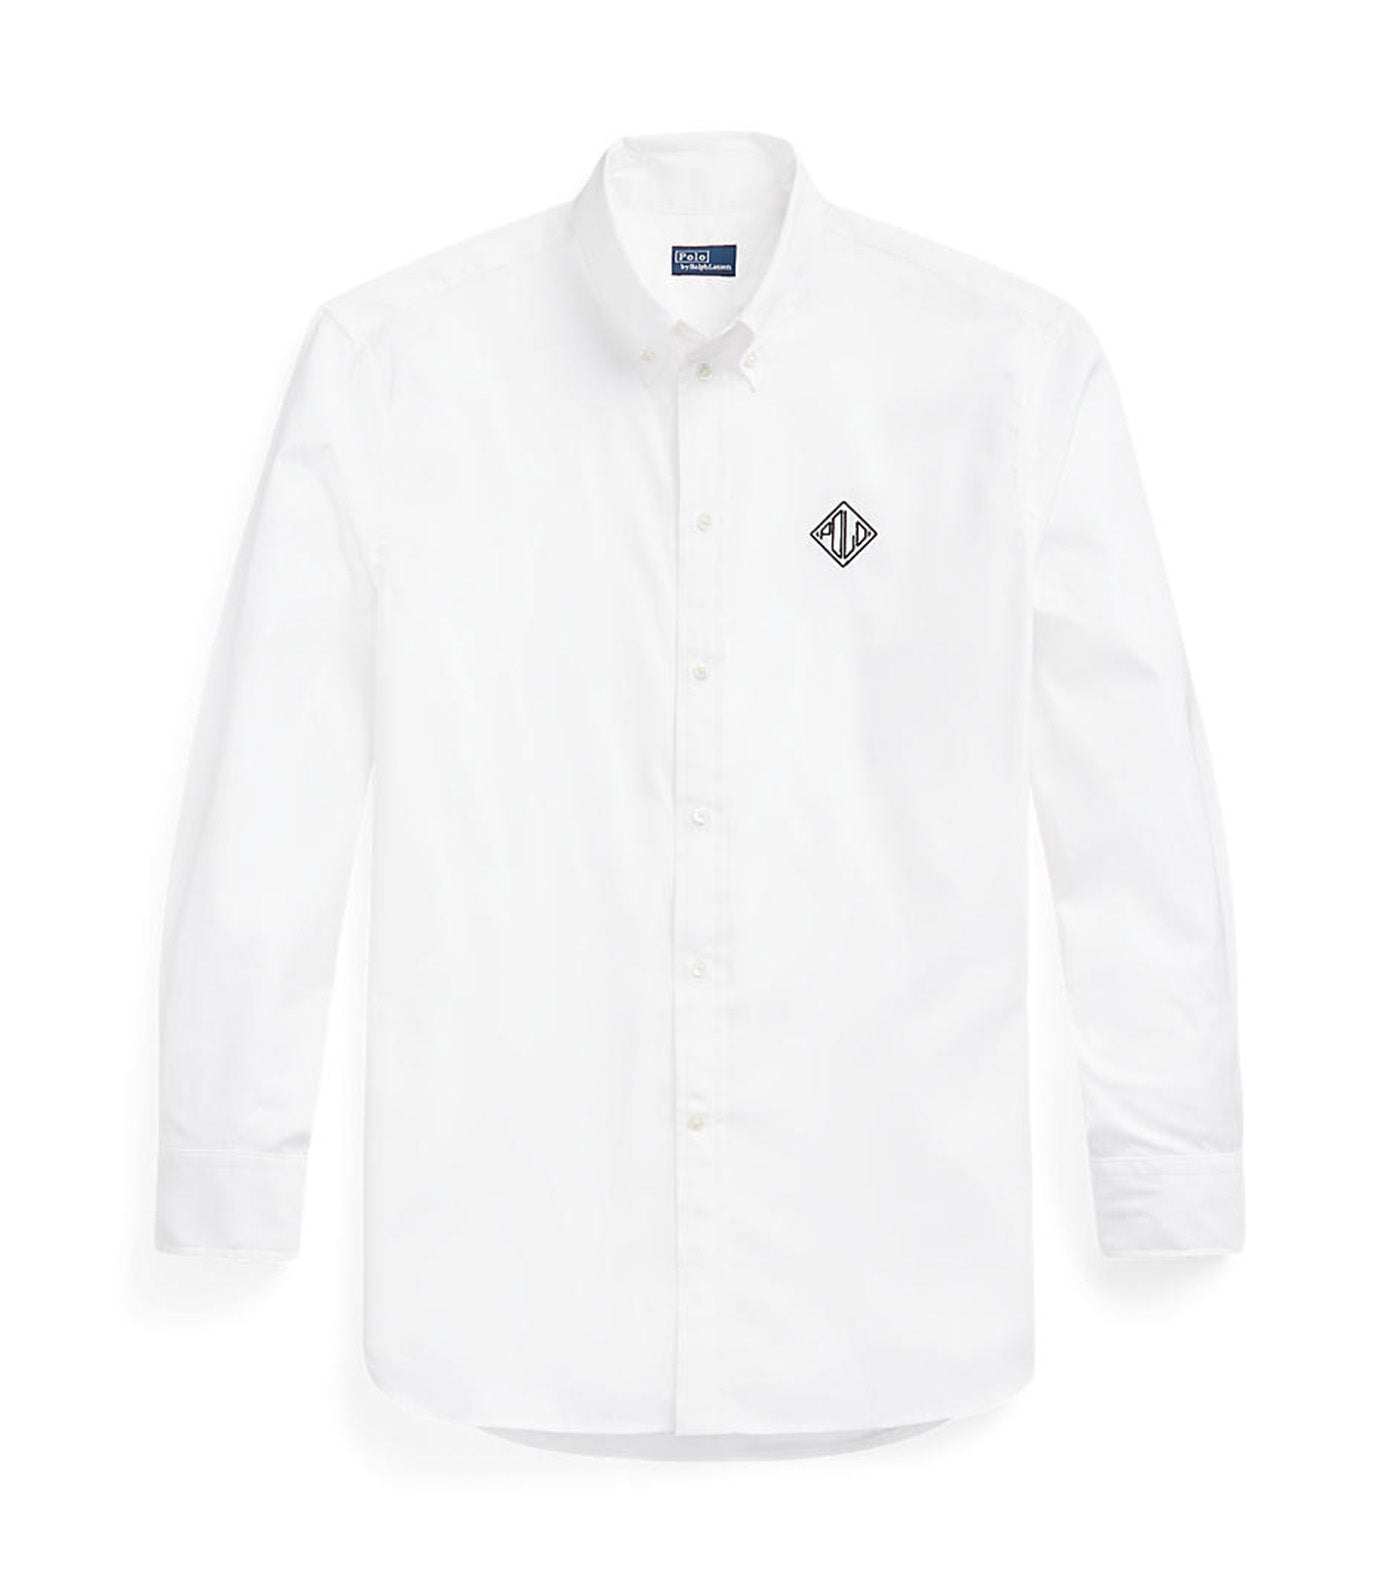 Women's Relaxed Fit Cotton Shirt White